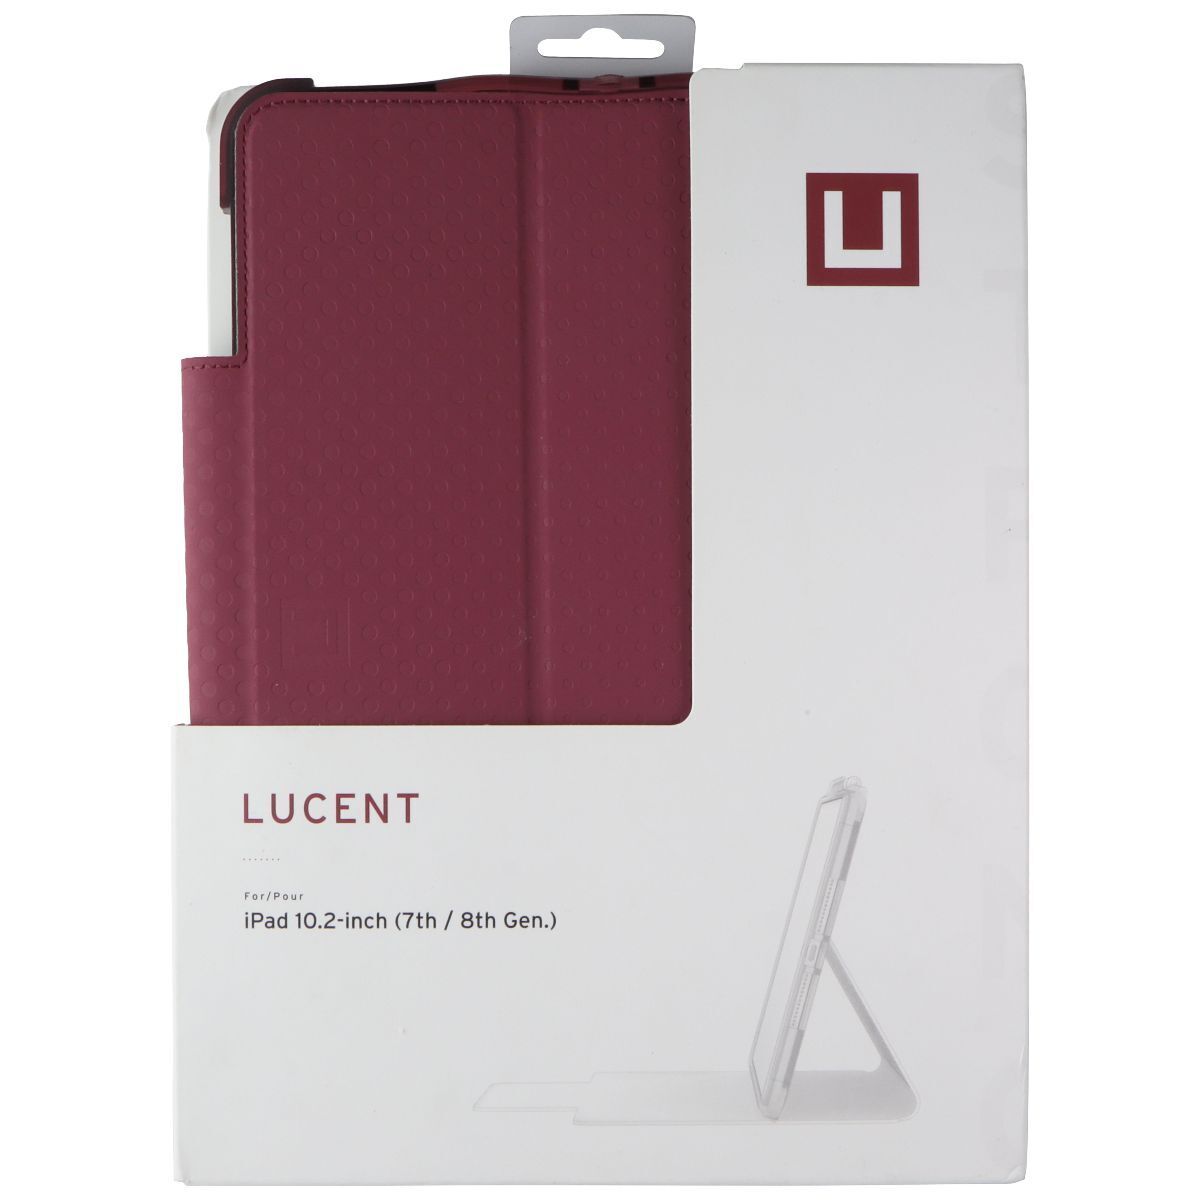 UAG Lucent Series Case for Apple iPad 10.2-inch (7th / 8th Gen) - Aubergine